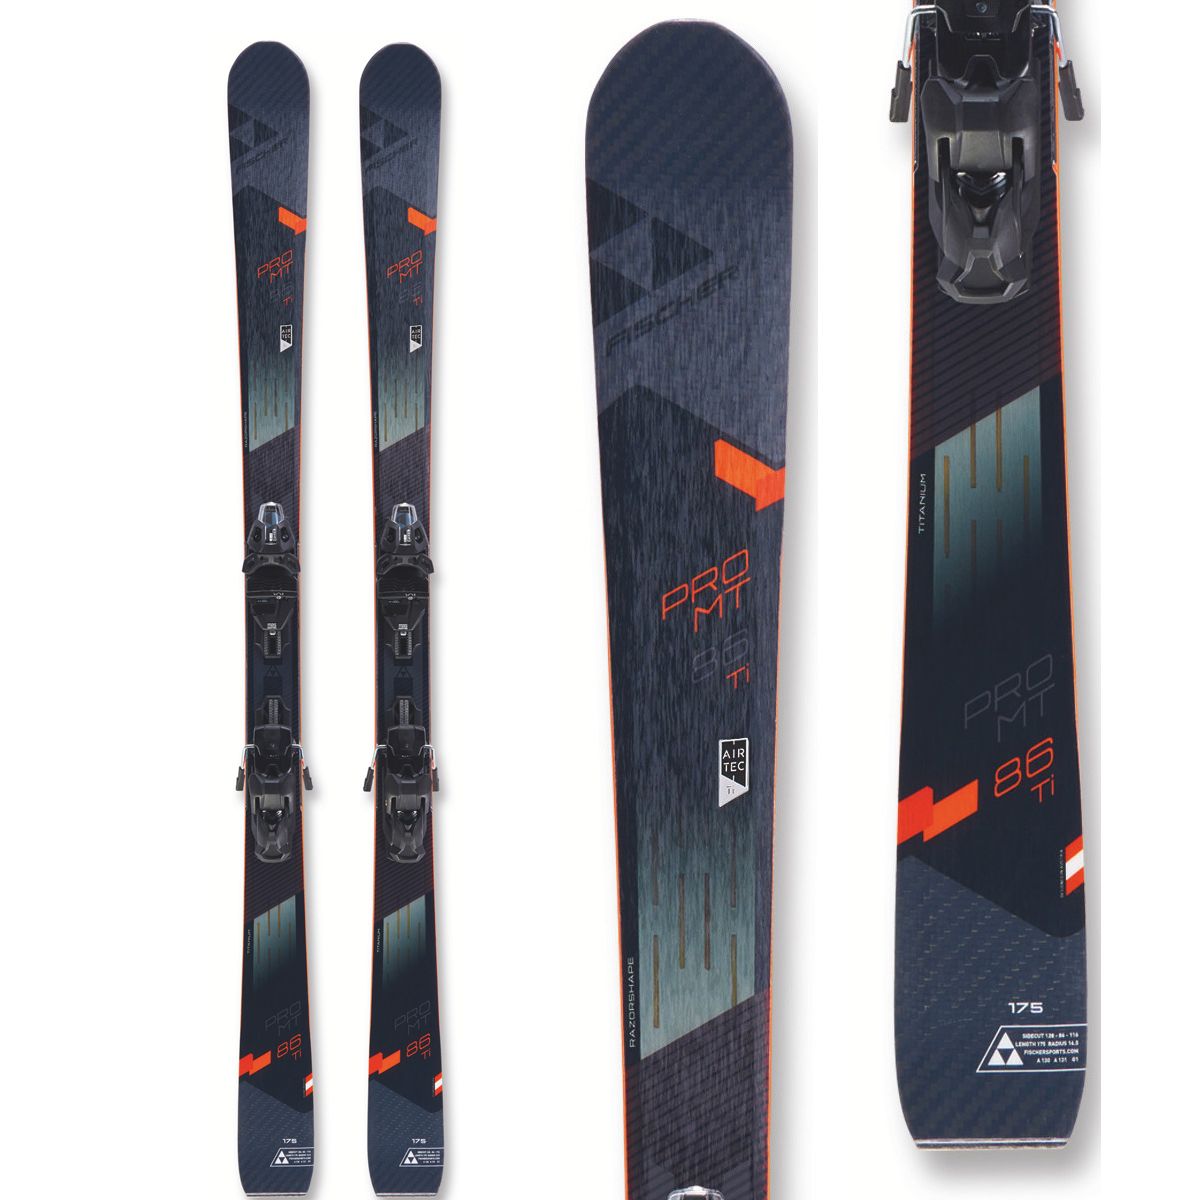 Pack Skis PRO MTN 86 TI 2019 + Fixations ATTACK 13 AT